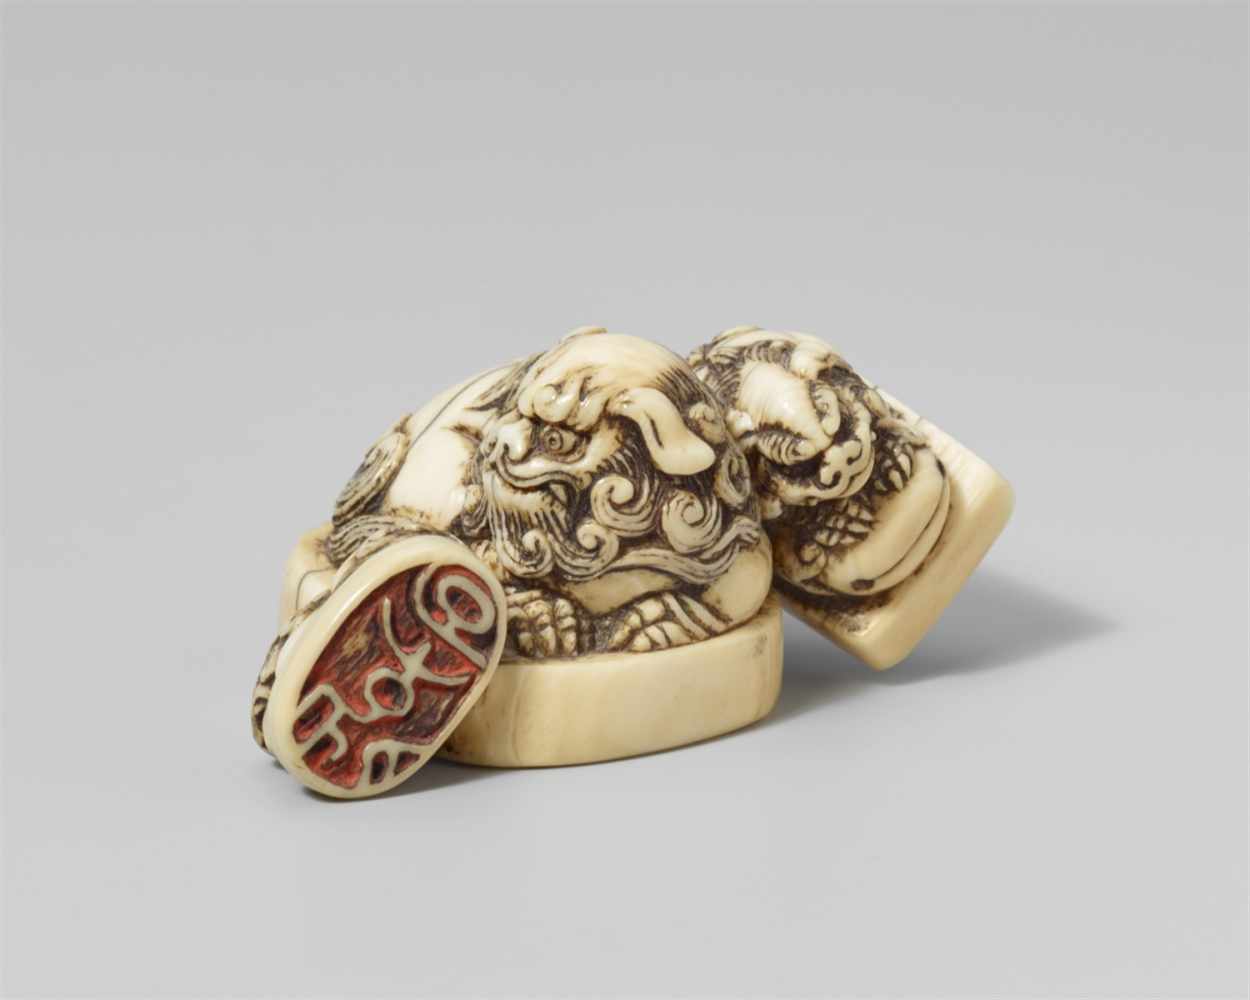 An ivory netsuke of a group of three seals. Mid-19th centuryAll seal knobs carved in shape of a